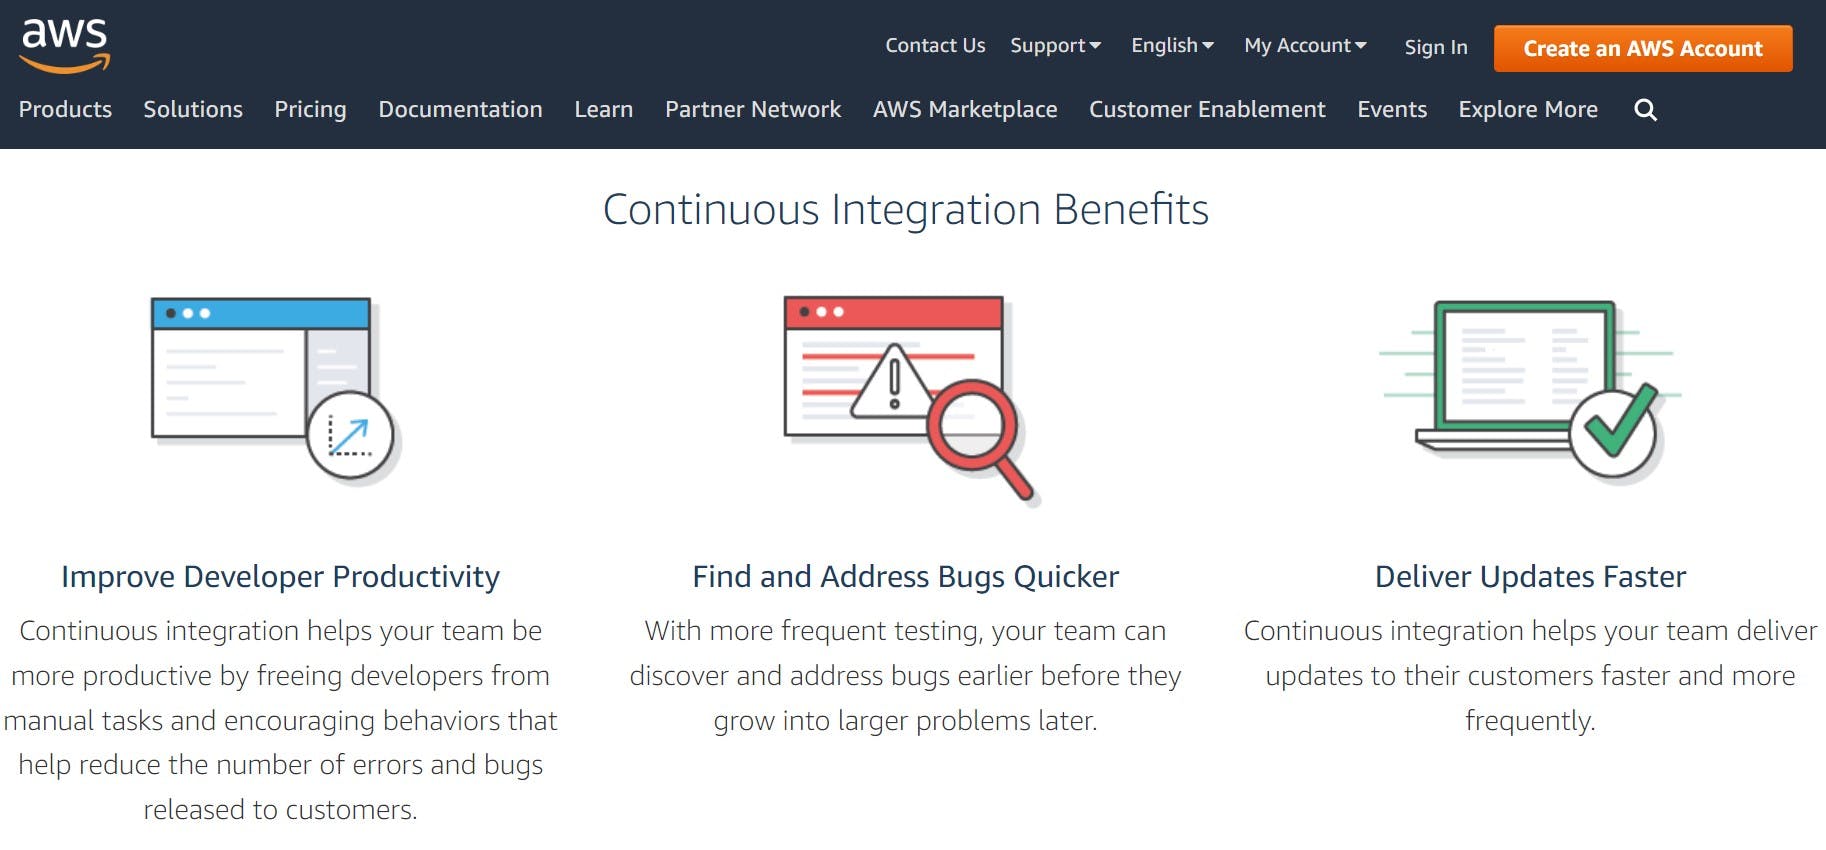 aws-benefits-of-continuous-integration.jpg